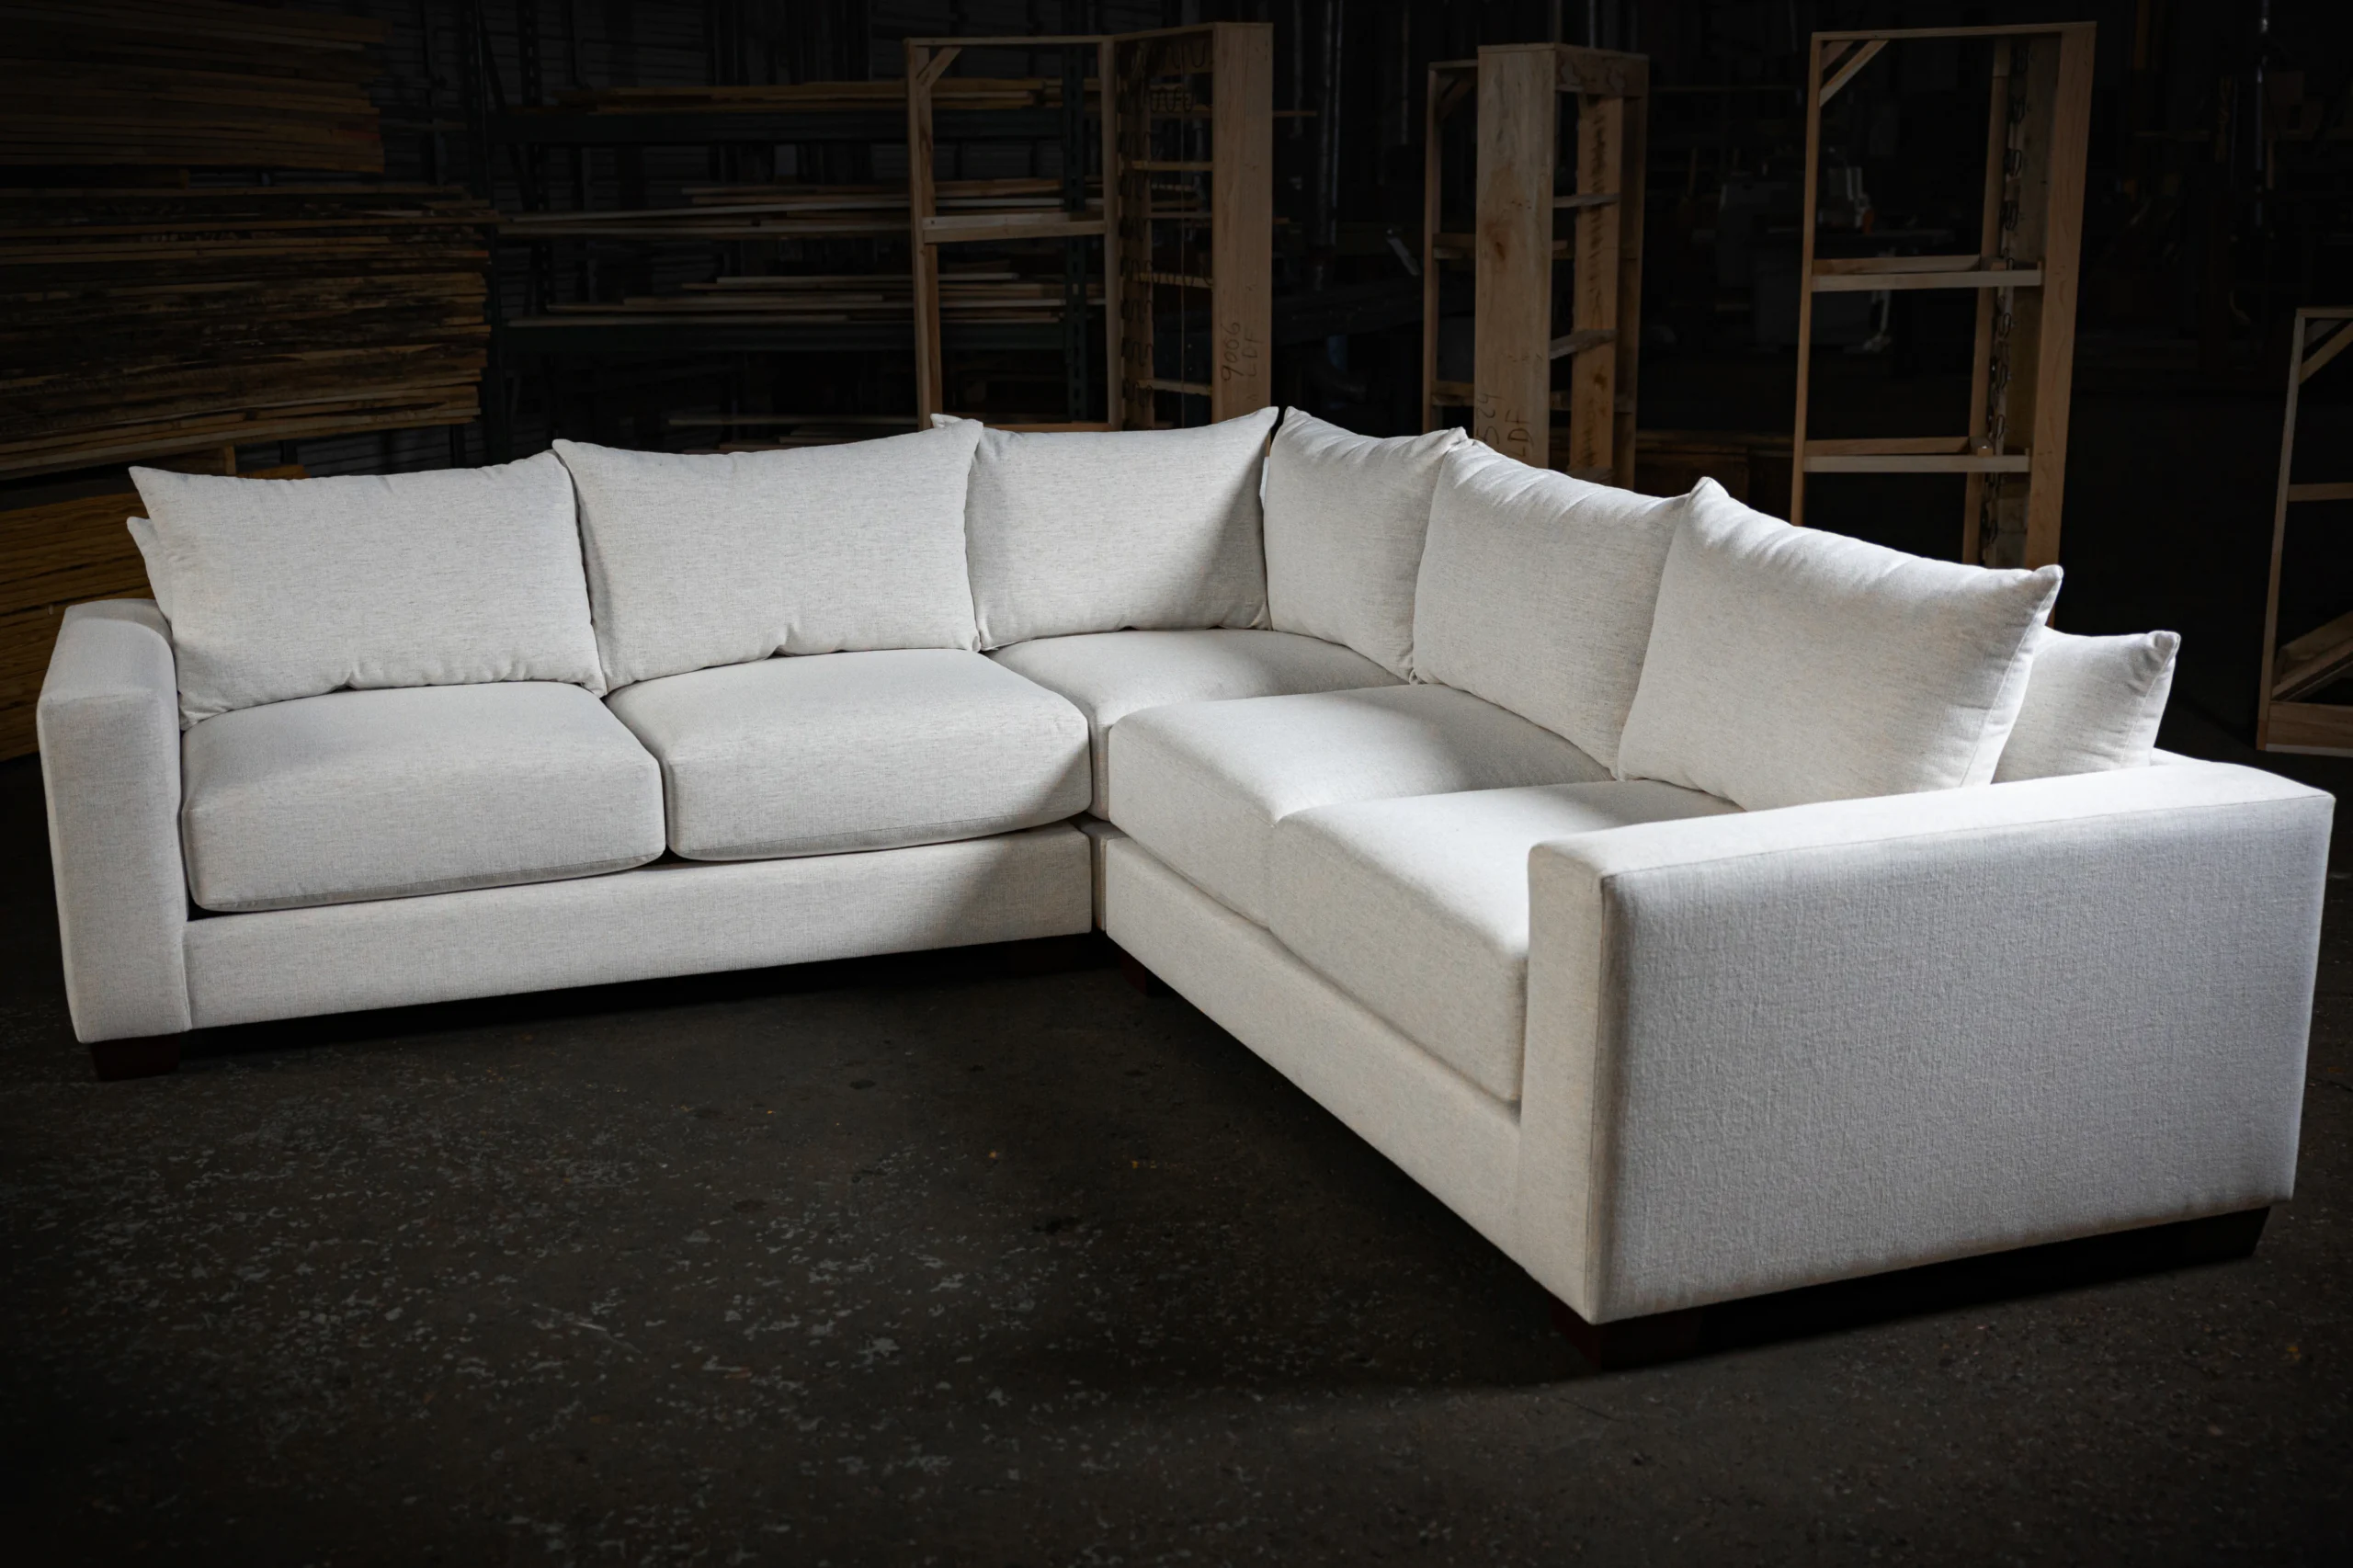 white sectional in a dark warehouse